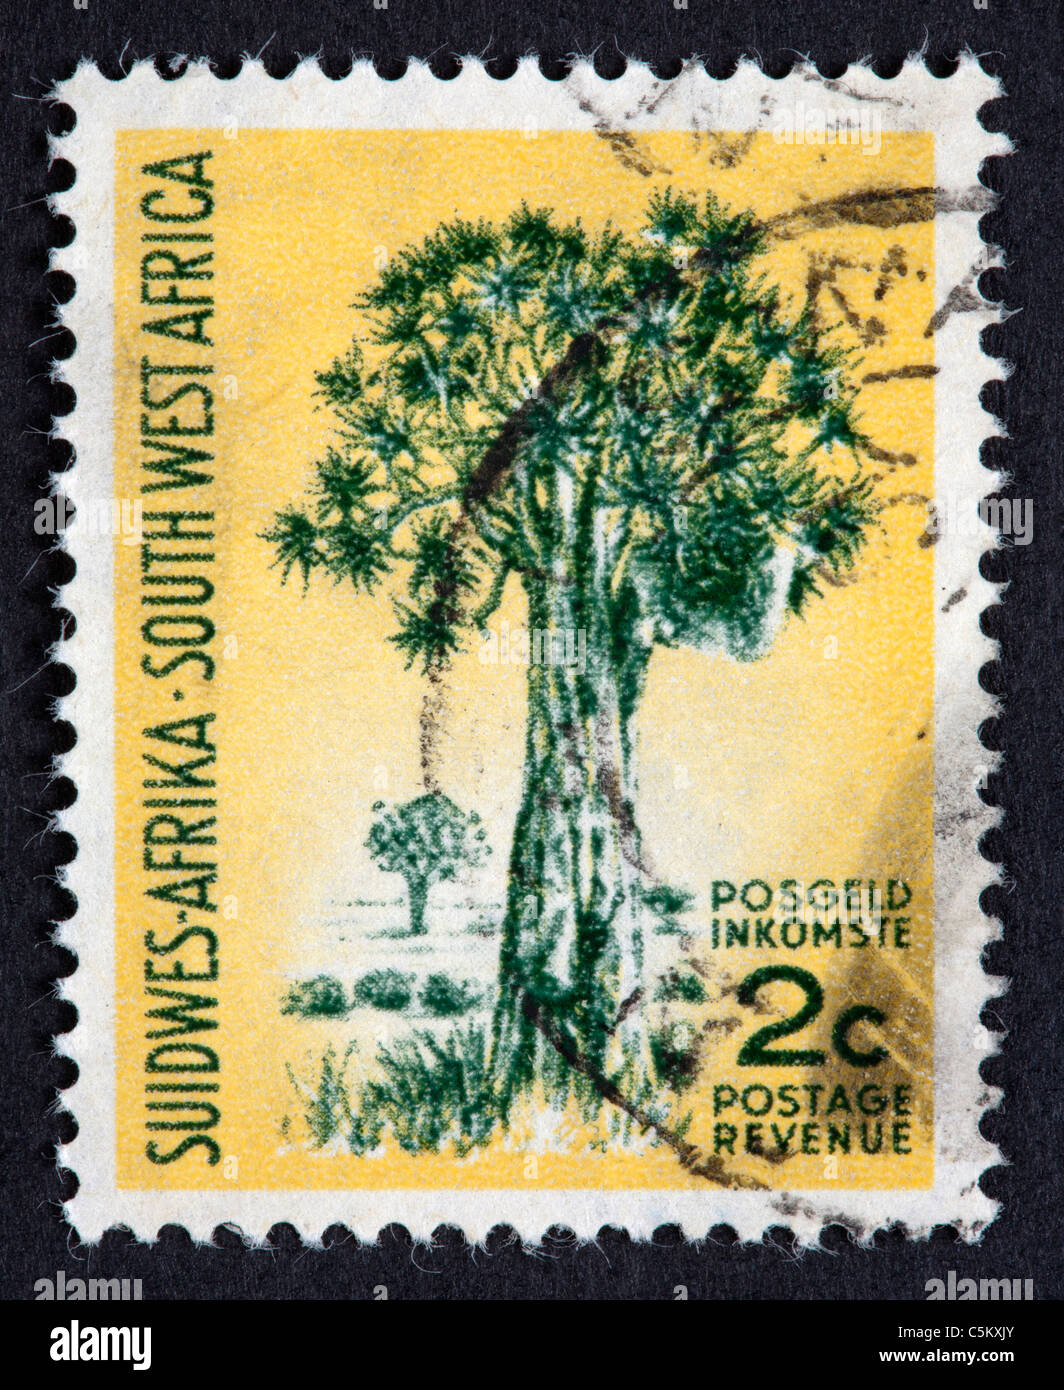 South-West Africa postage stamp Stock Photo